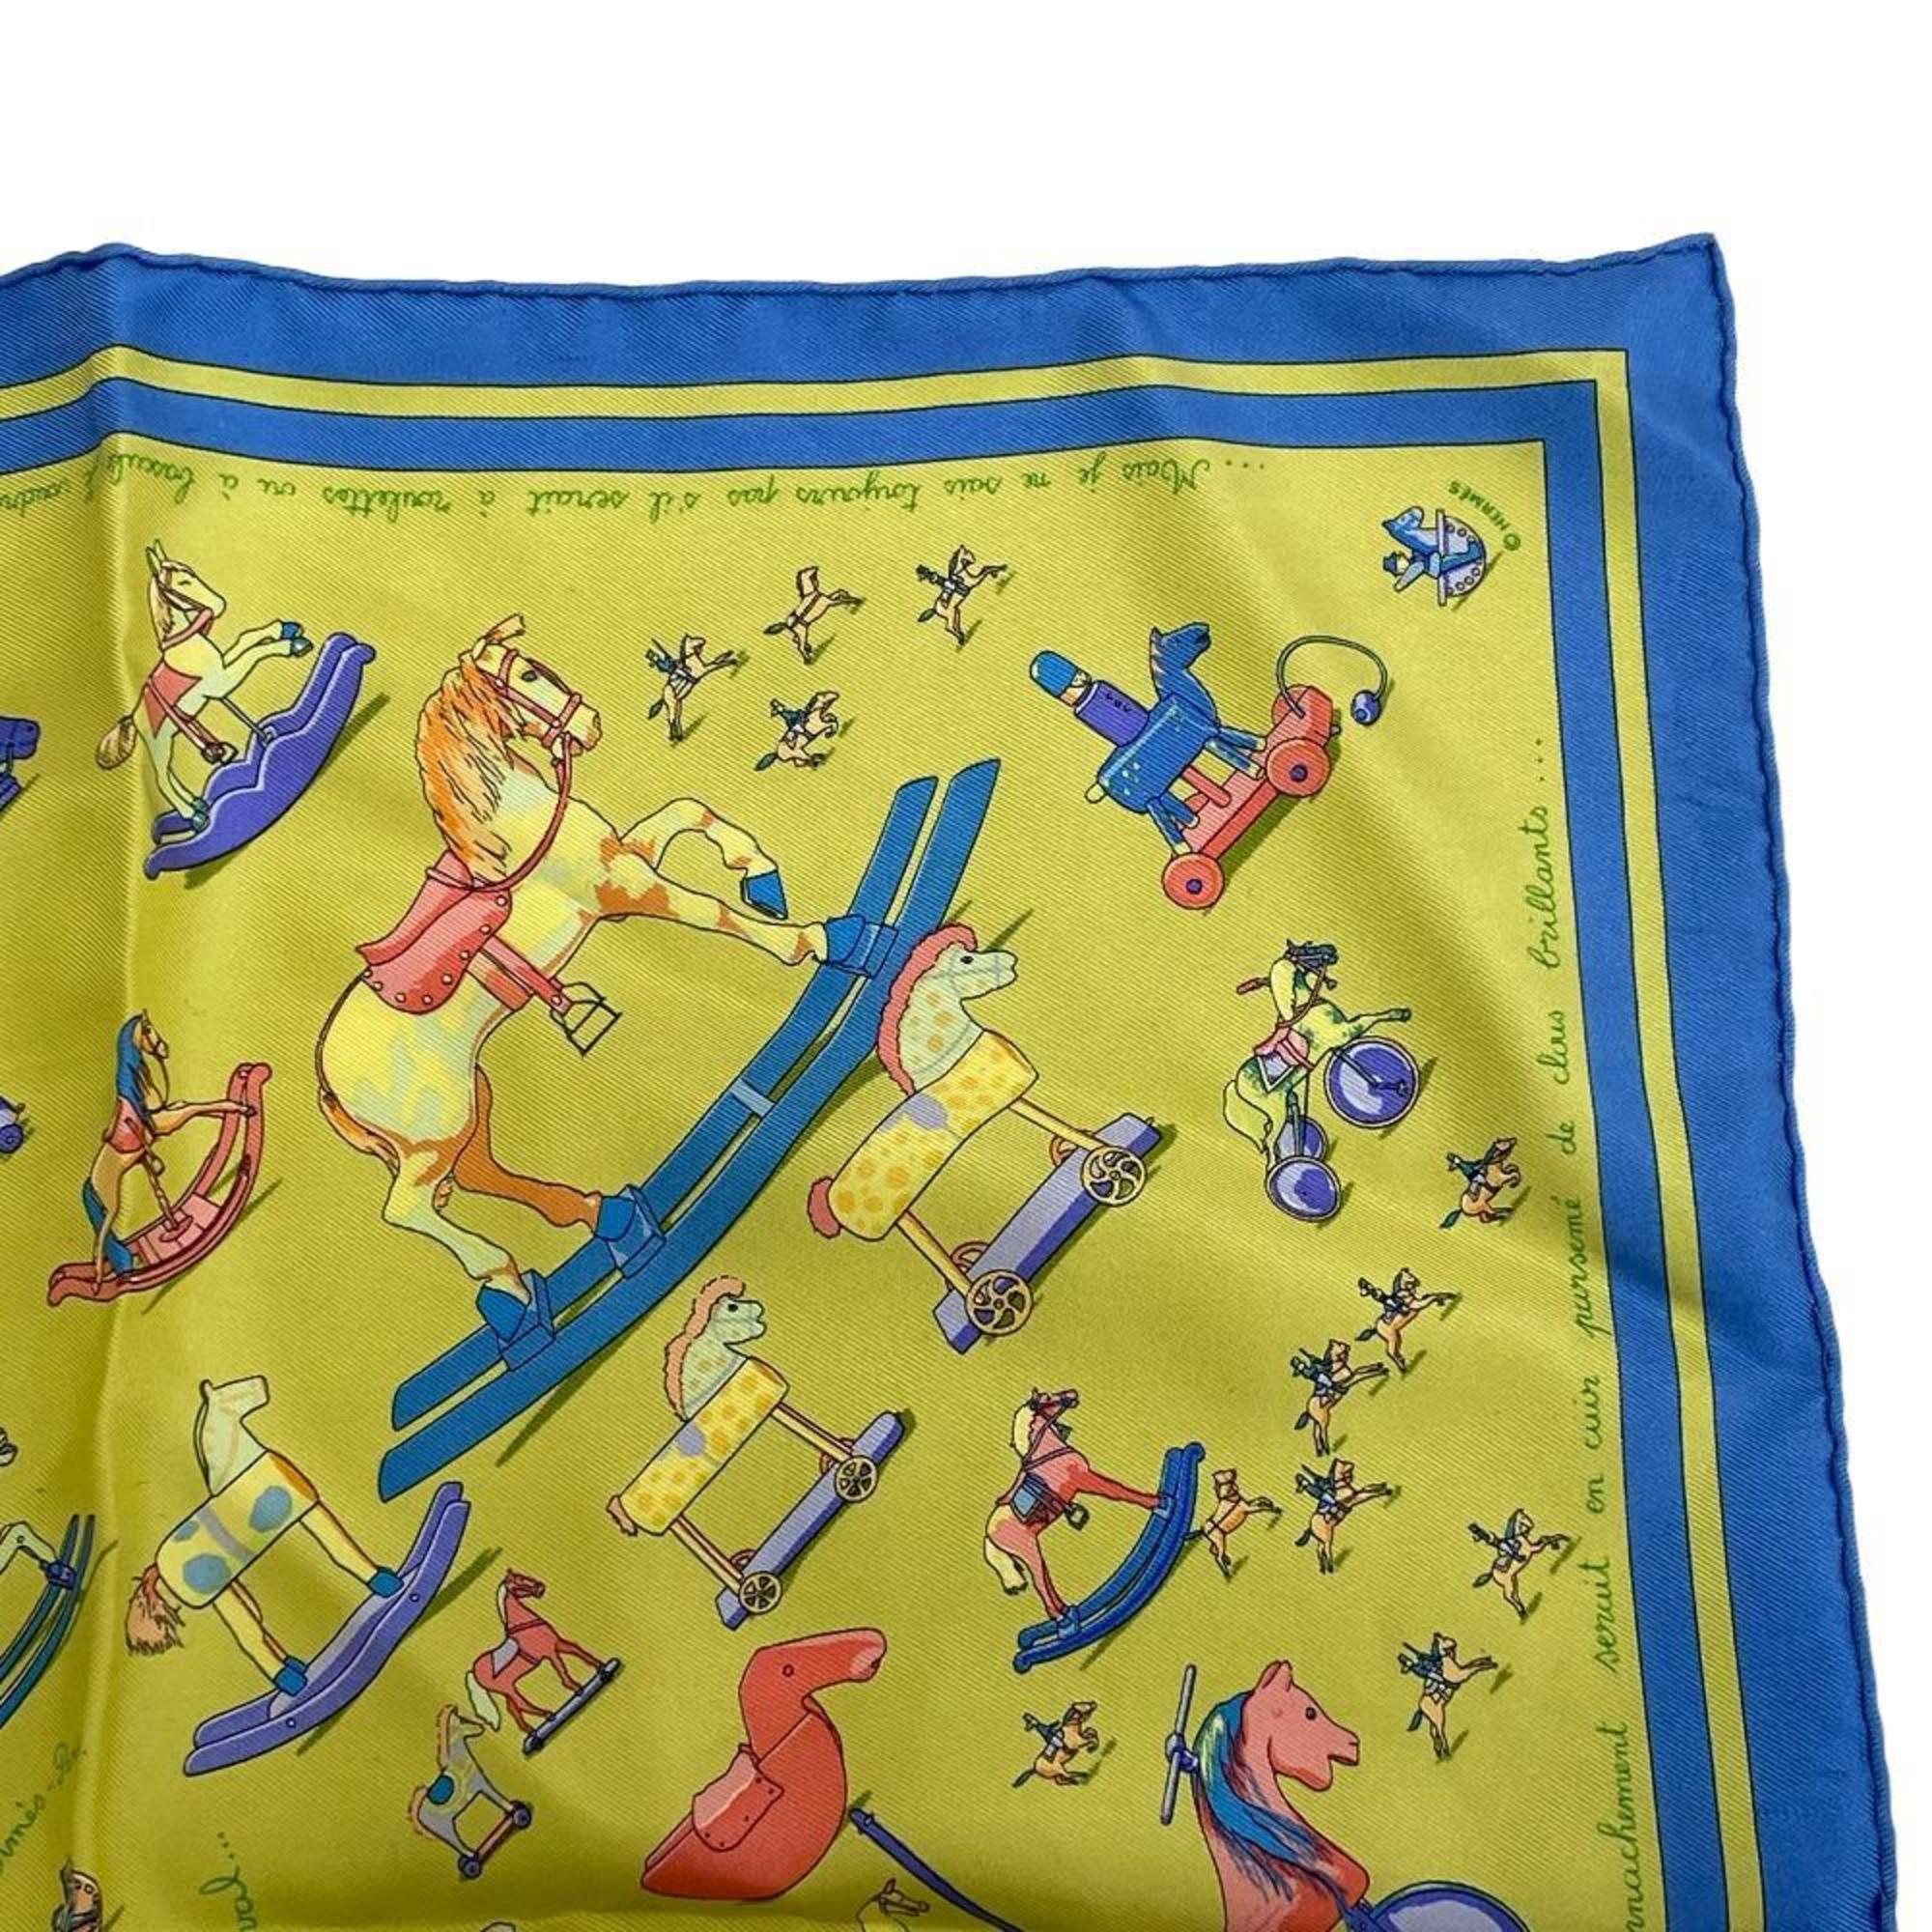 HERMES Hermes Carre 45 Raconte moi Le Cheval Talking about Horses Scarf Muffler Yellow Women's Z0006536